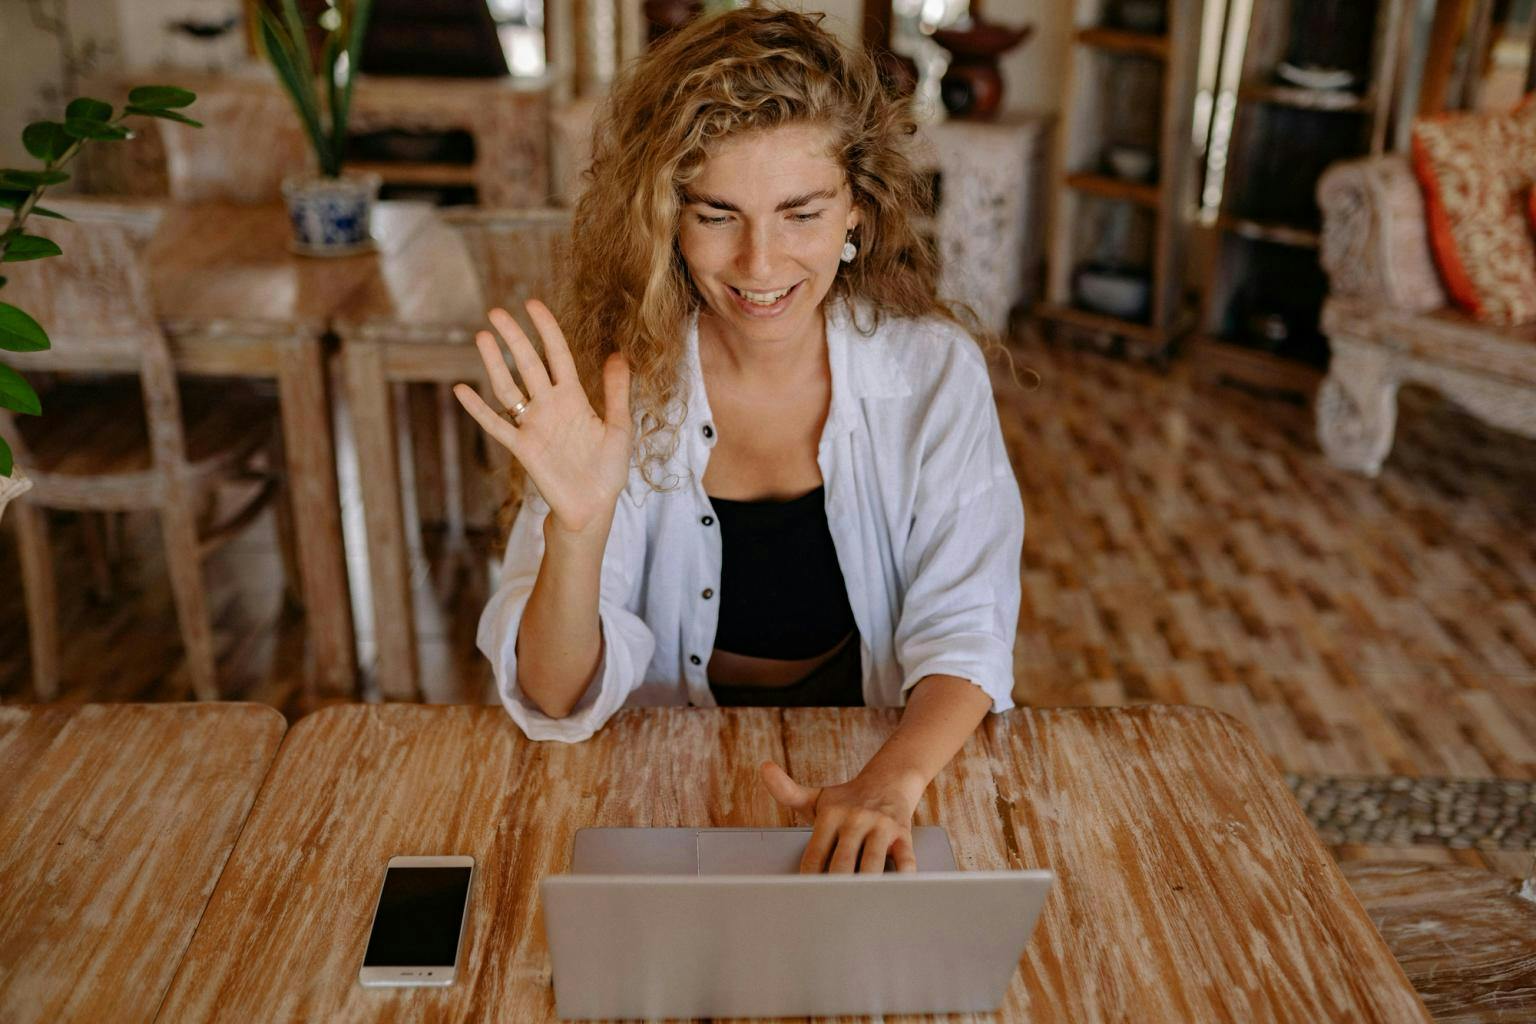 A woman on a laptop waves hello to the person she is talking to